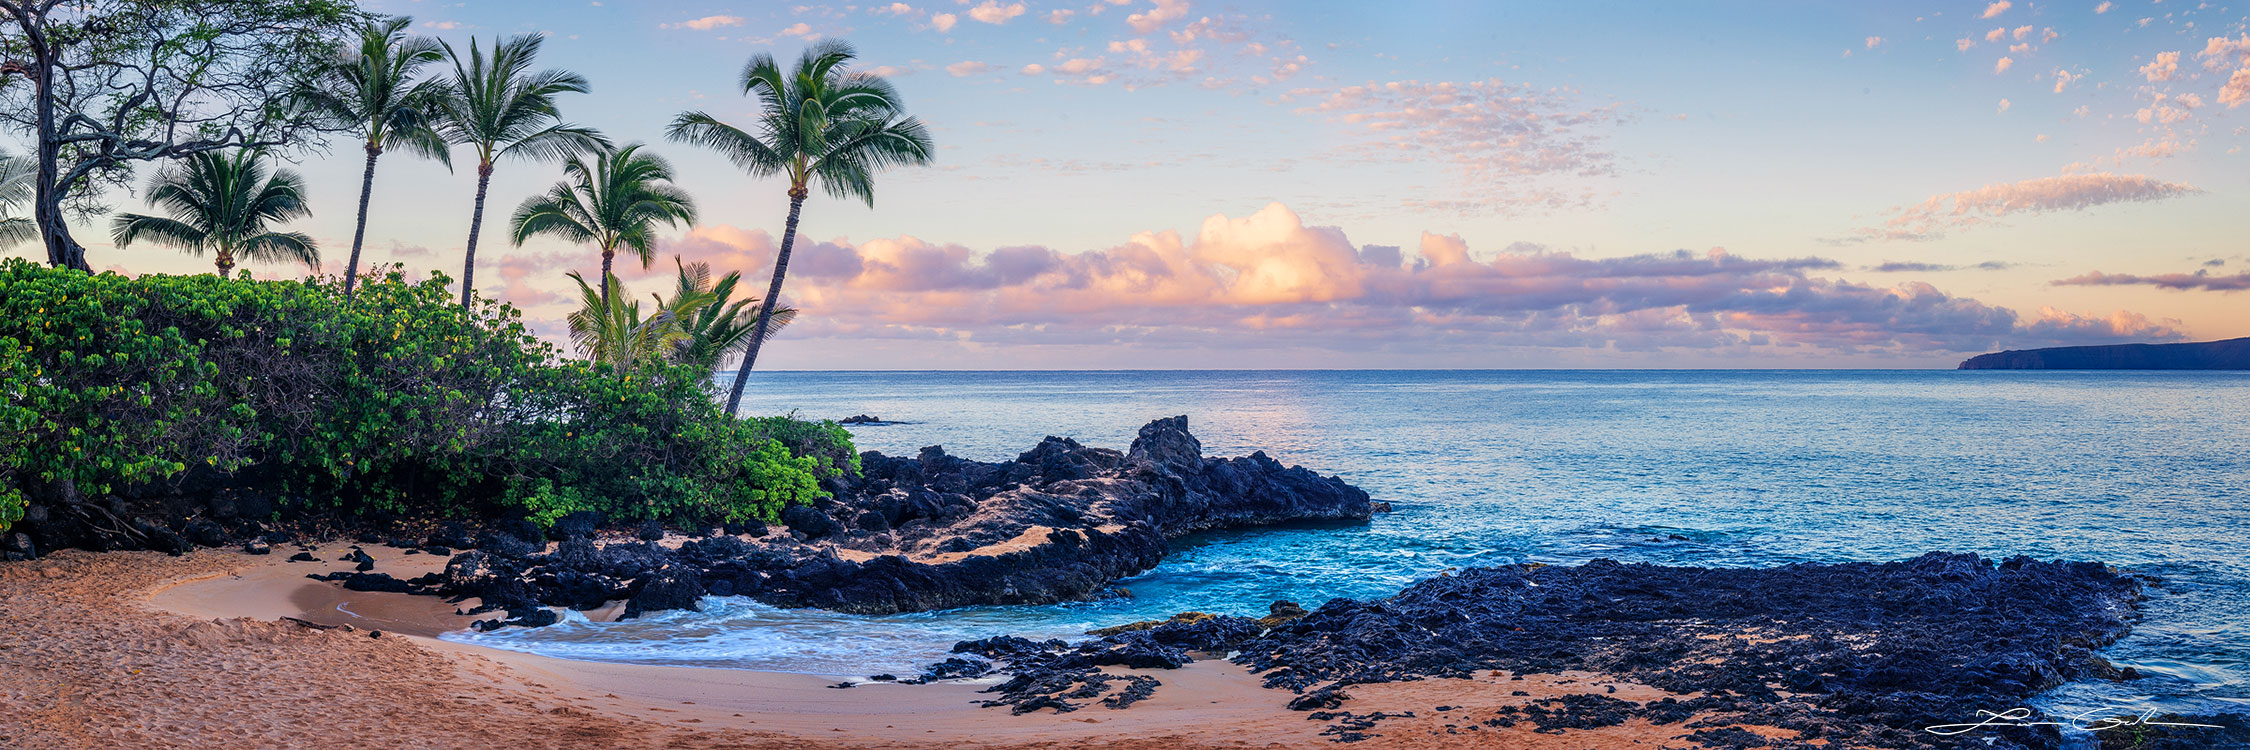 Panoramic view of a secluded lava rock beach in Hawaii at sunrise, with calm blue ocean, lush green vegetation and palm trees, under a blue sky with distant pink-hued clouds - Gintchin Fine Art.